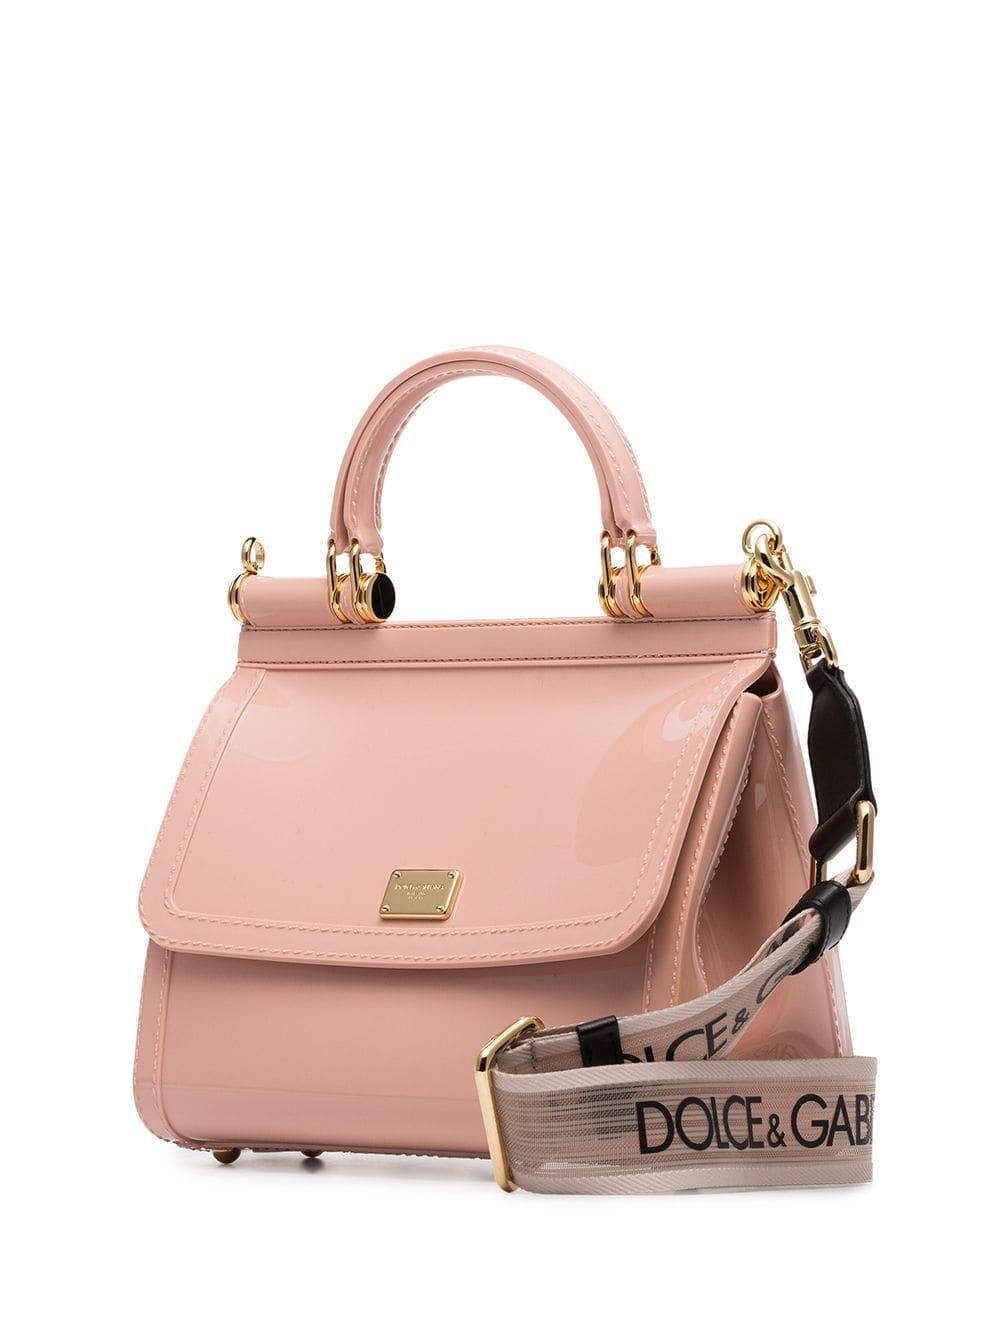 Dolce & Gabbana Leather Small Sicily Jelly Tote in Pink - Lyst